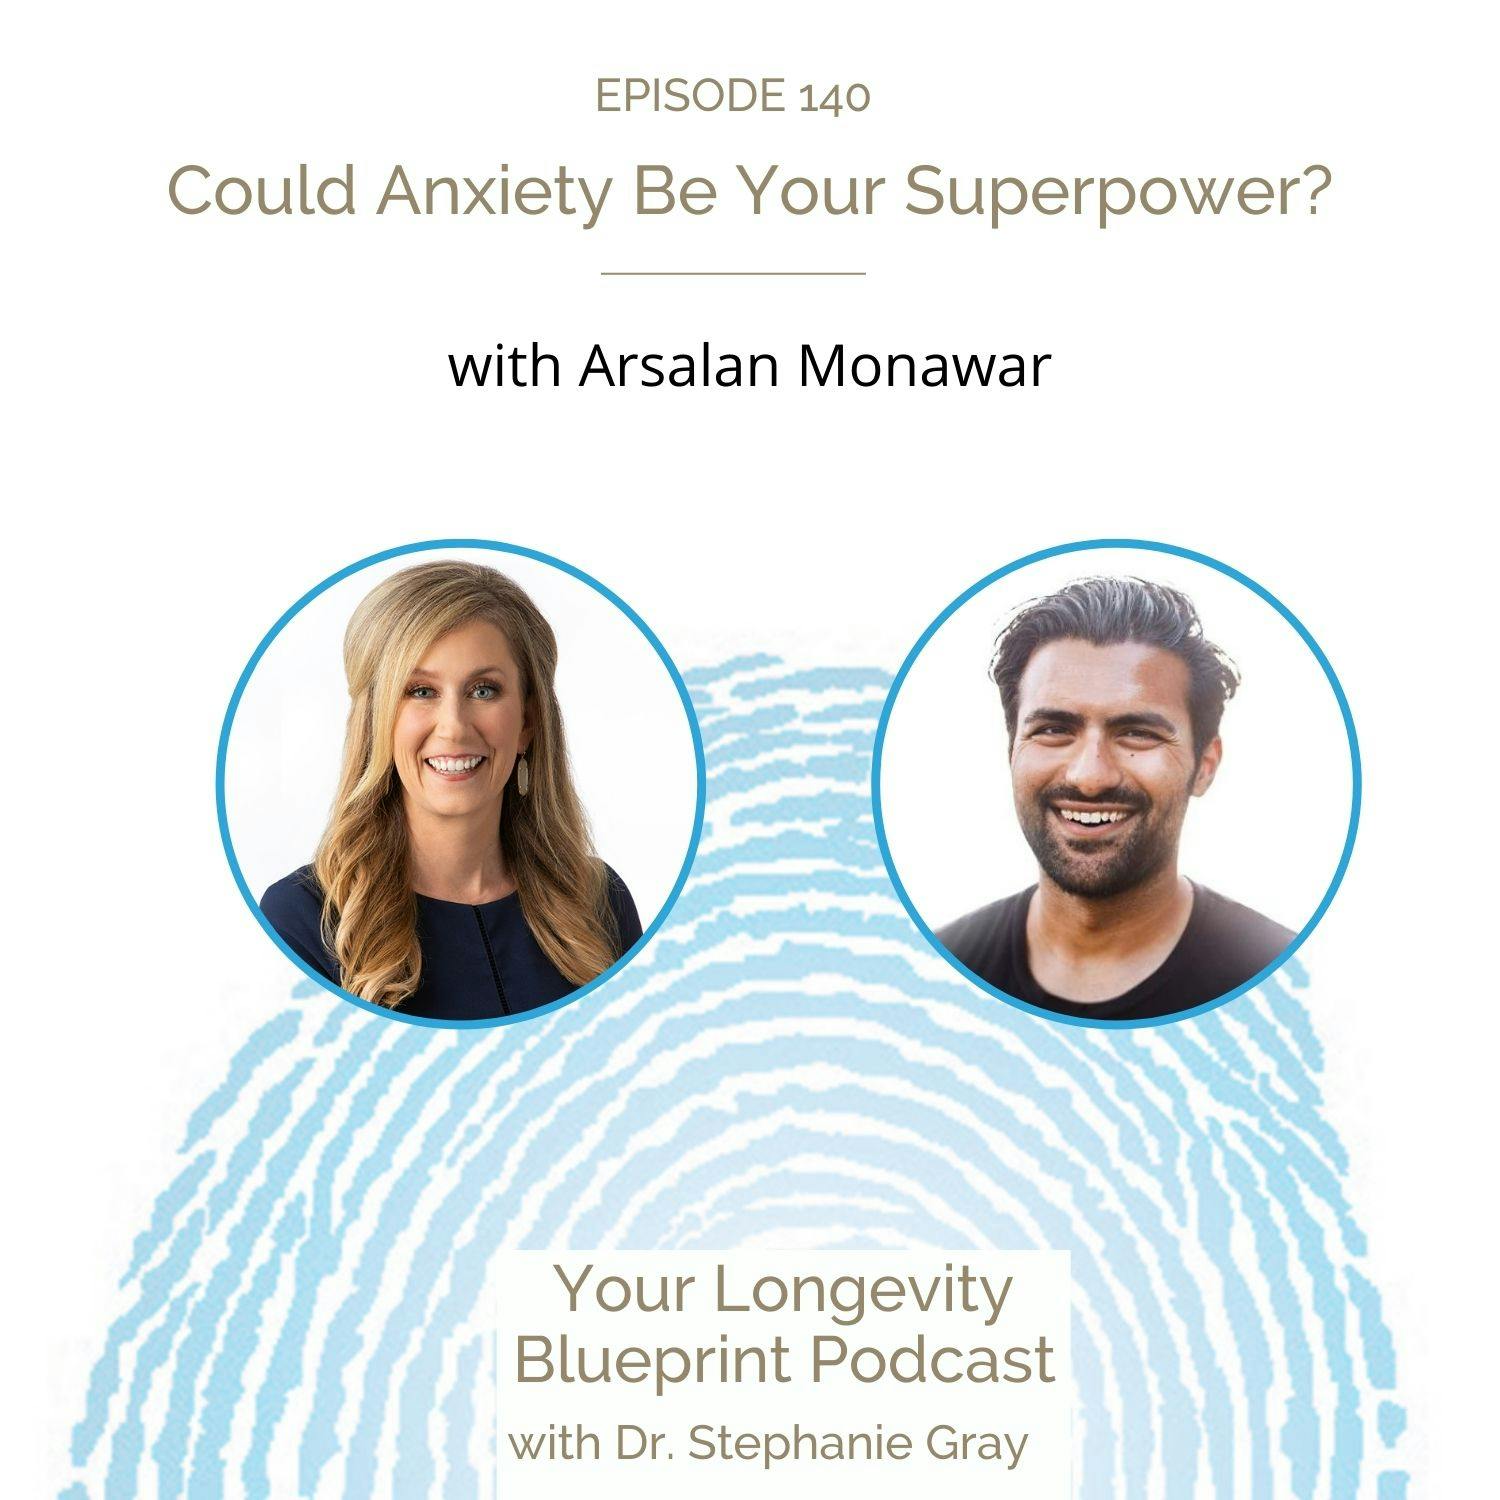 Could Anxiety Be Your Superpower? with Arsalan Monawar